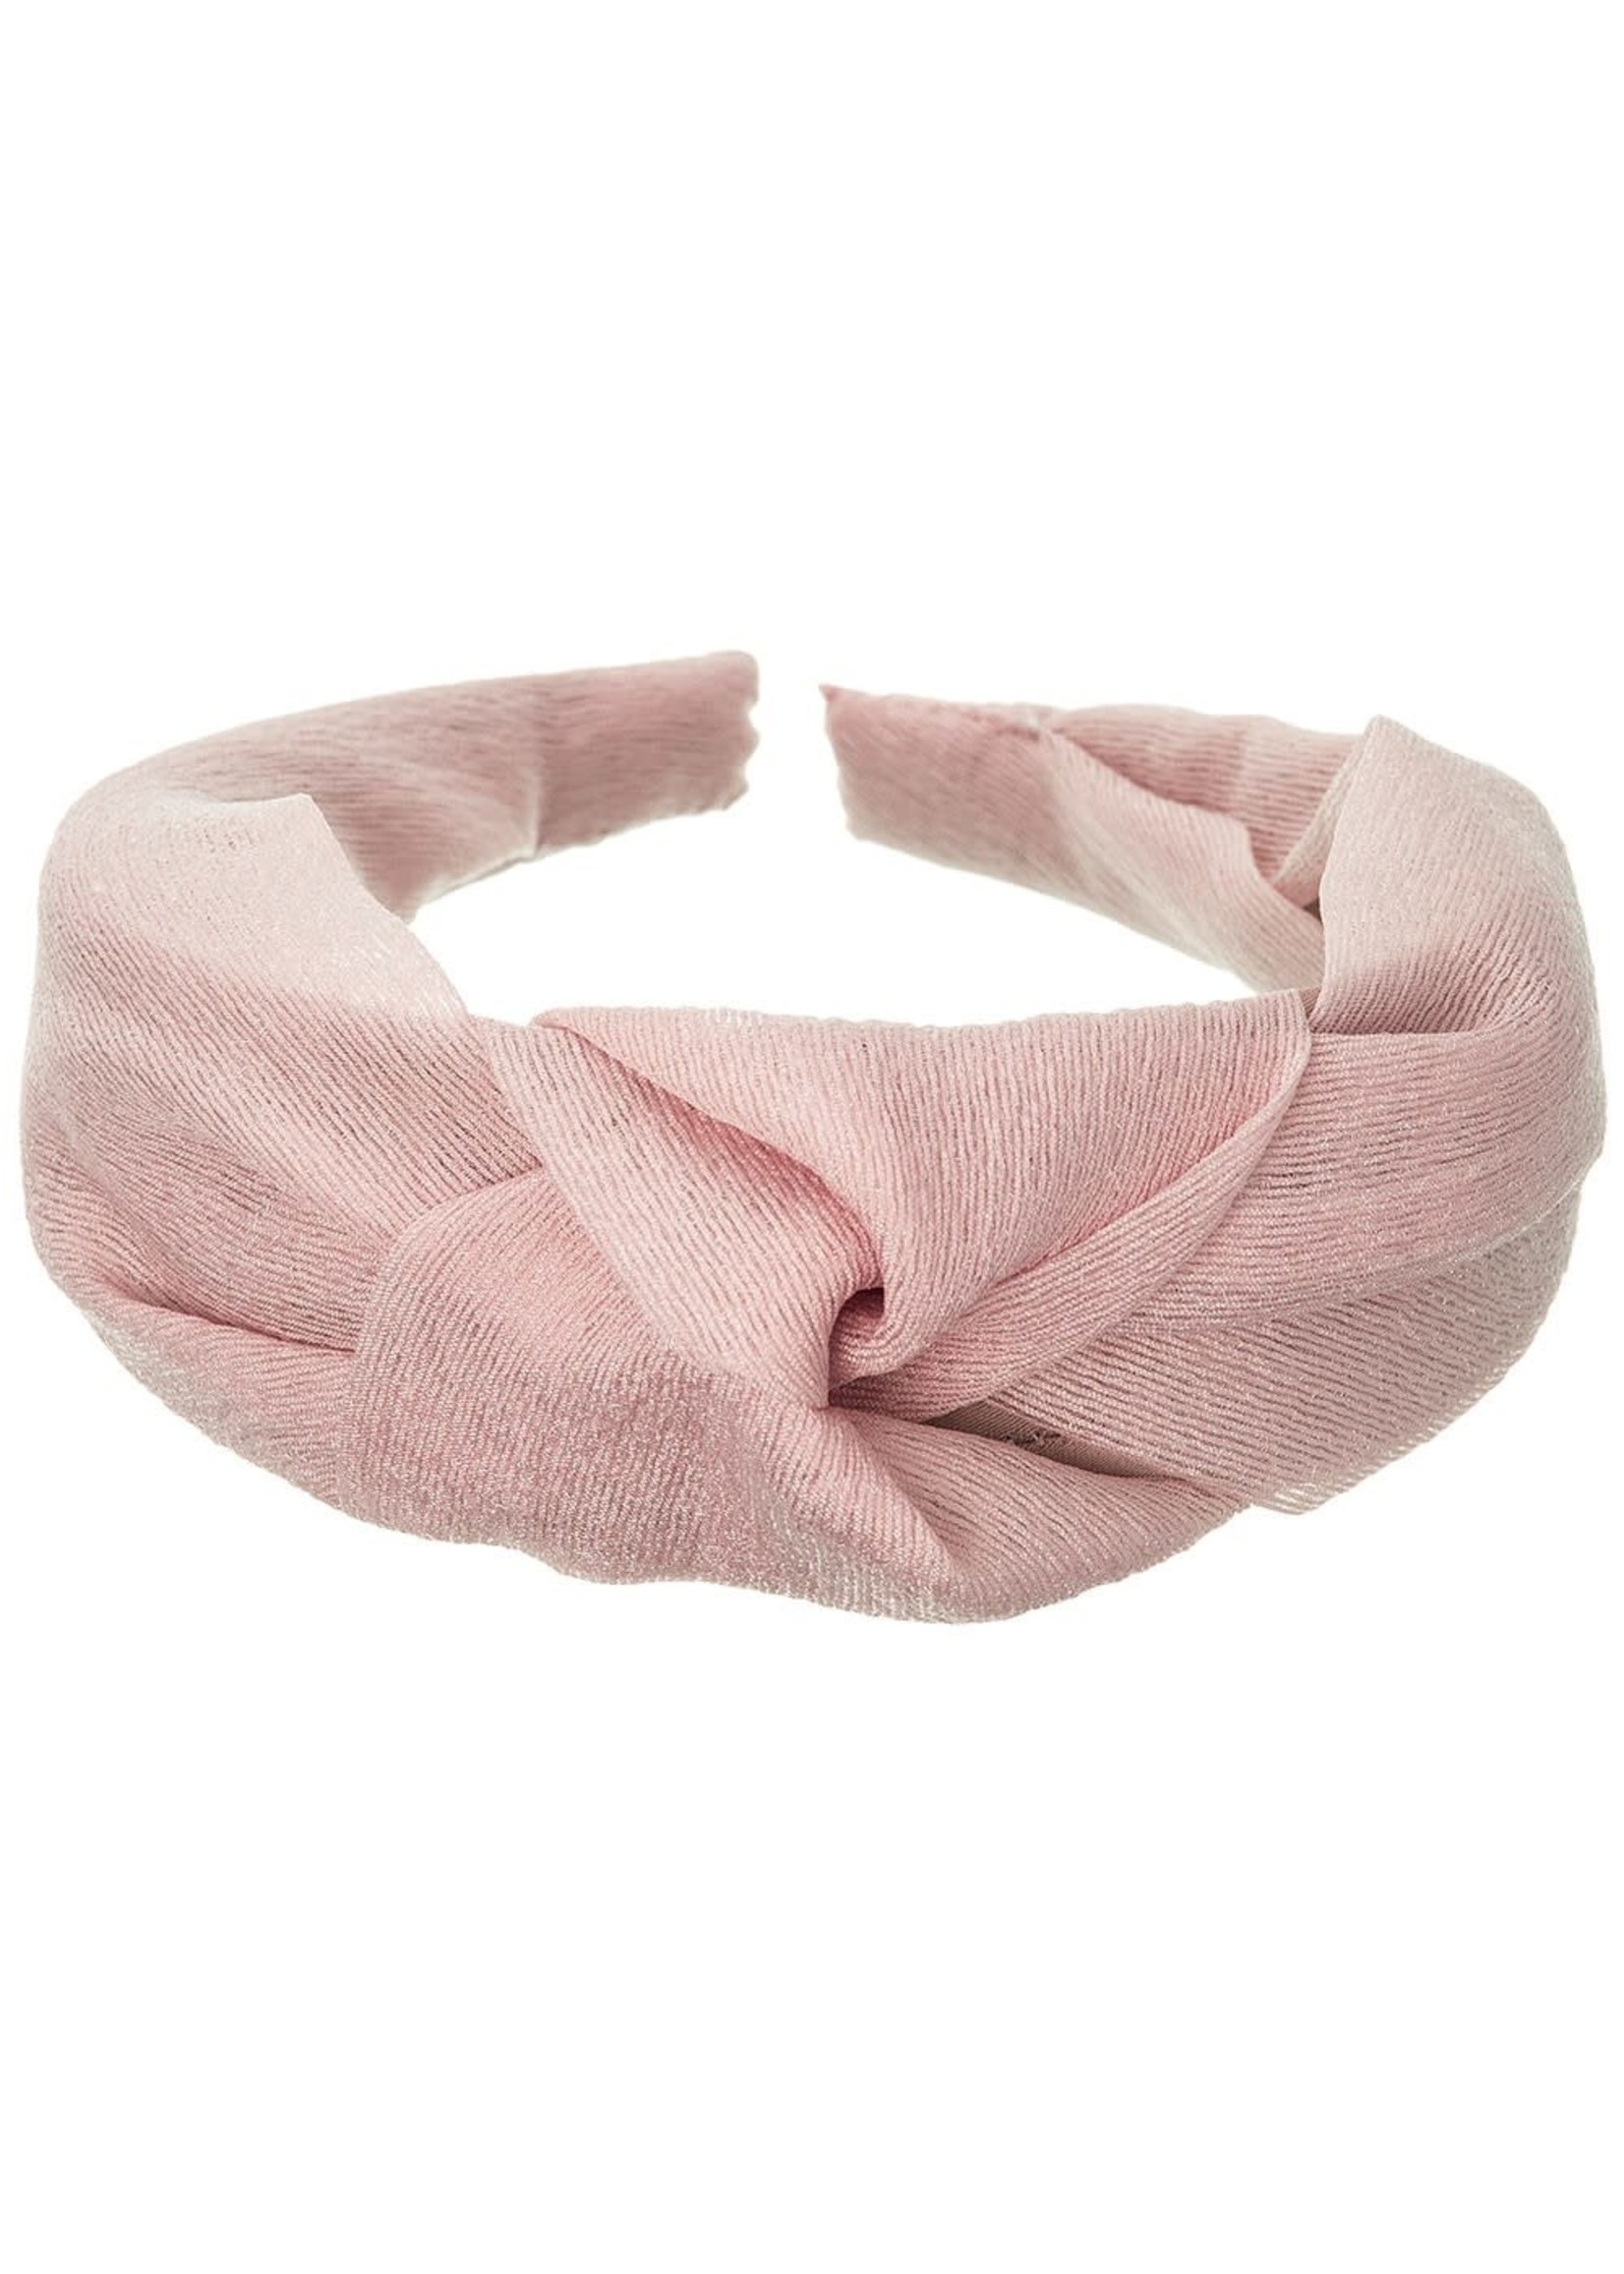 Siena Chiffon Knotted Hairband -  Antique Pink